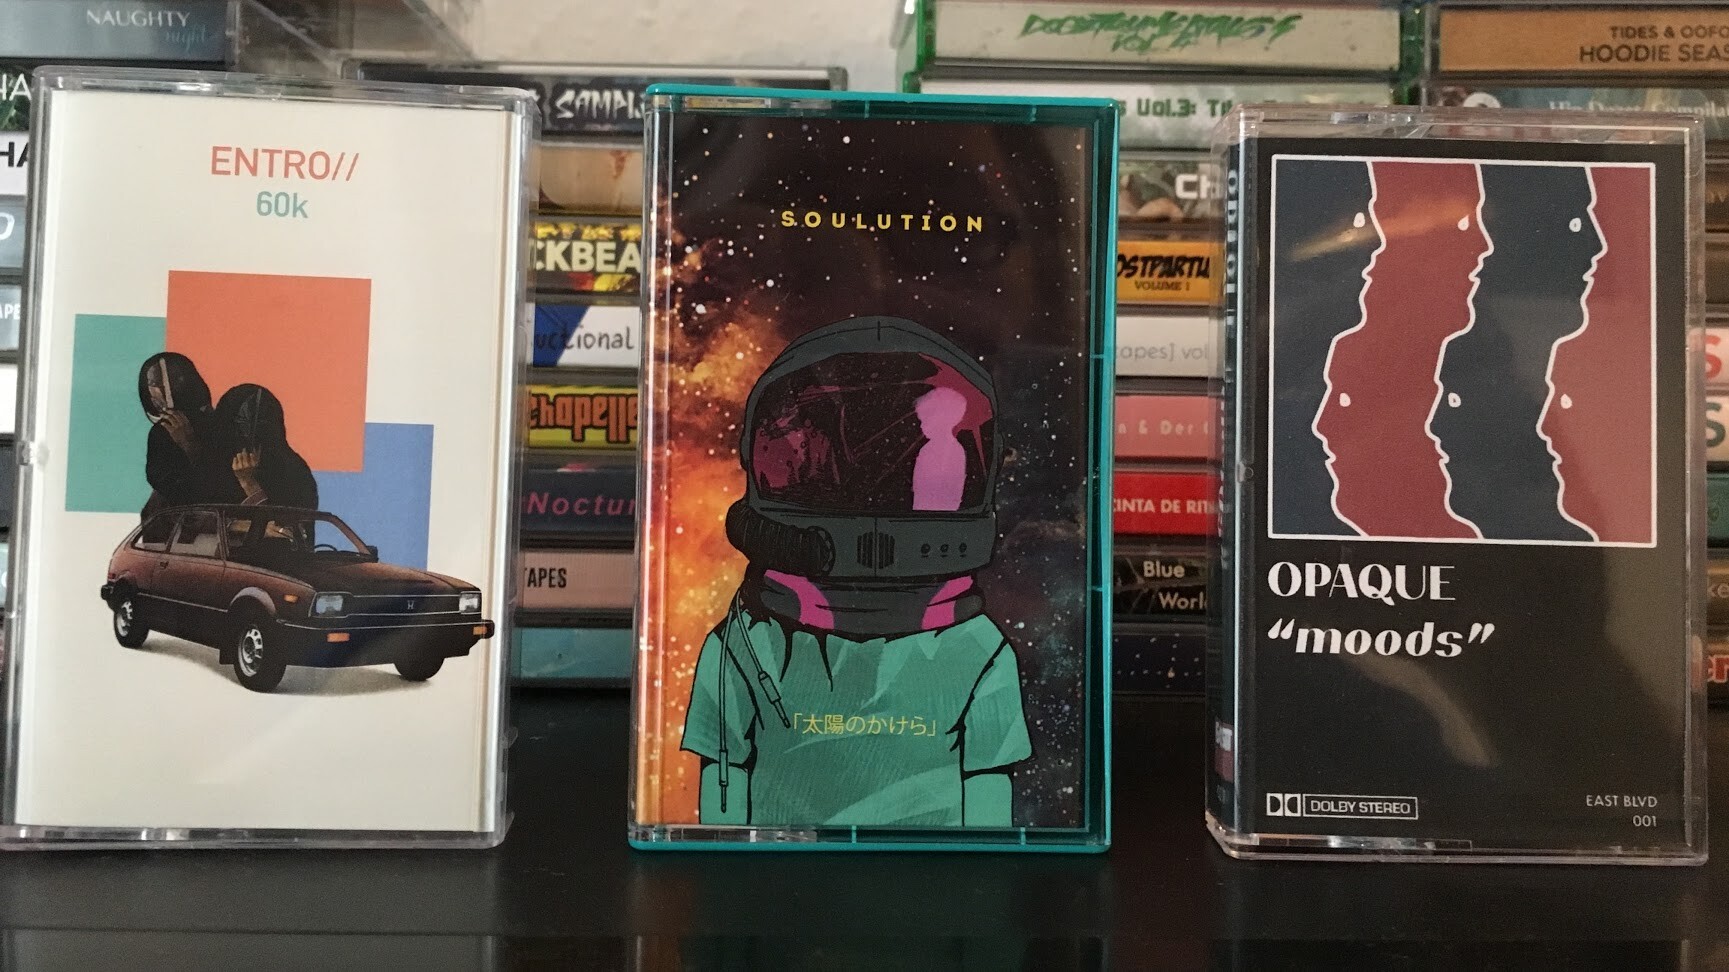 Entro, Soulution, OPAQUE - Tapes 28